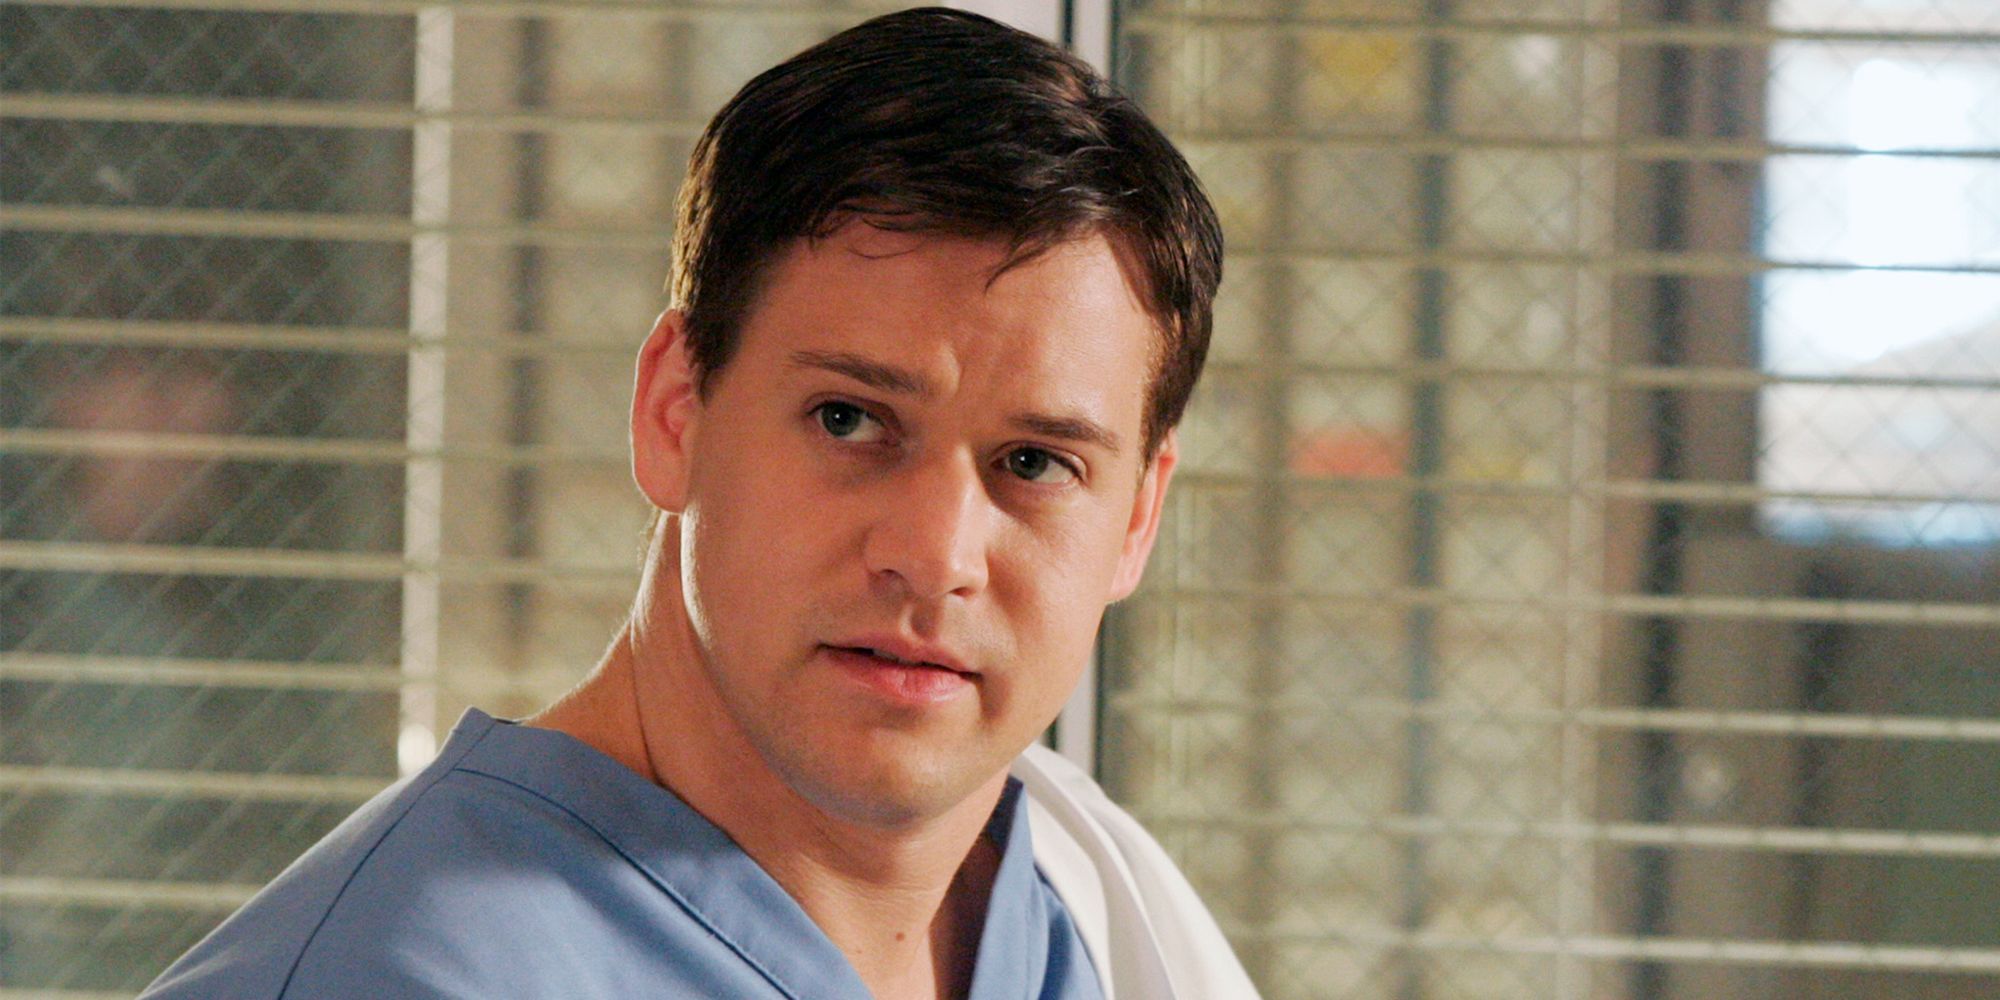 Greys Anatomy The 5 Most 5 Least Believable Character Deaths Less Believable George OMalley